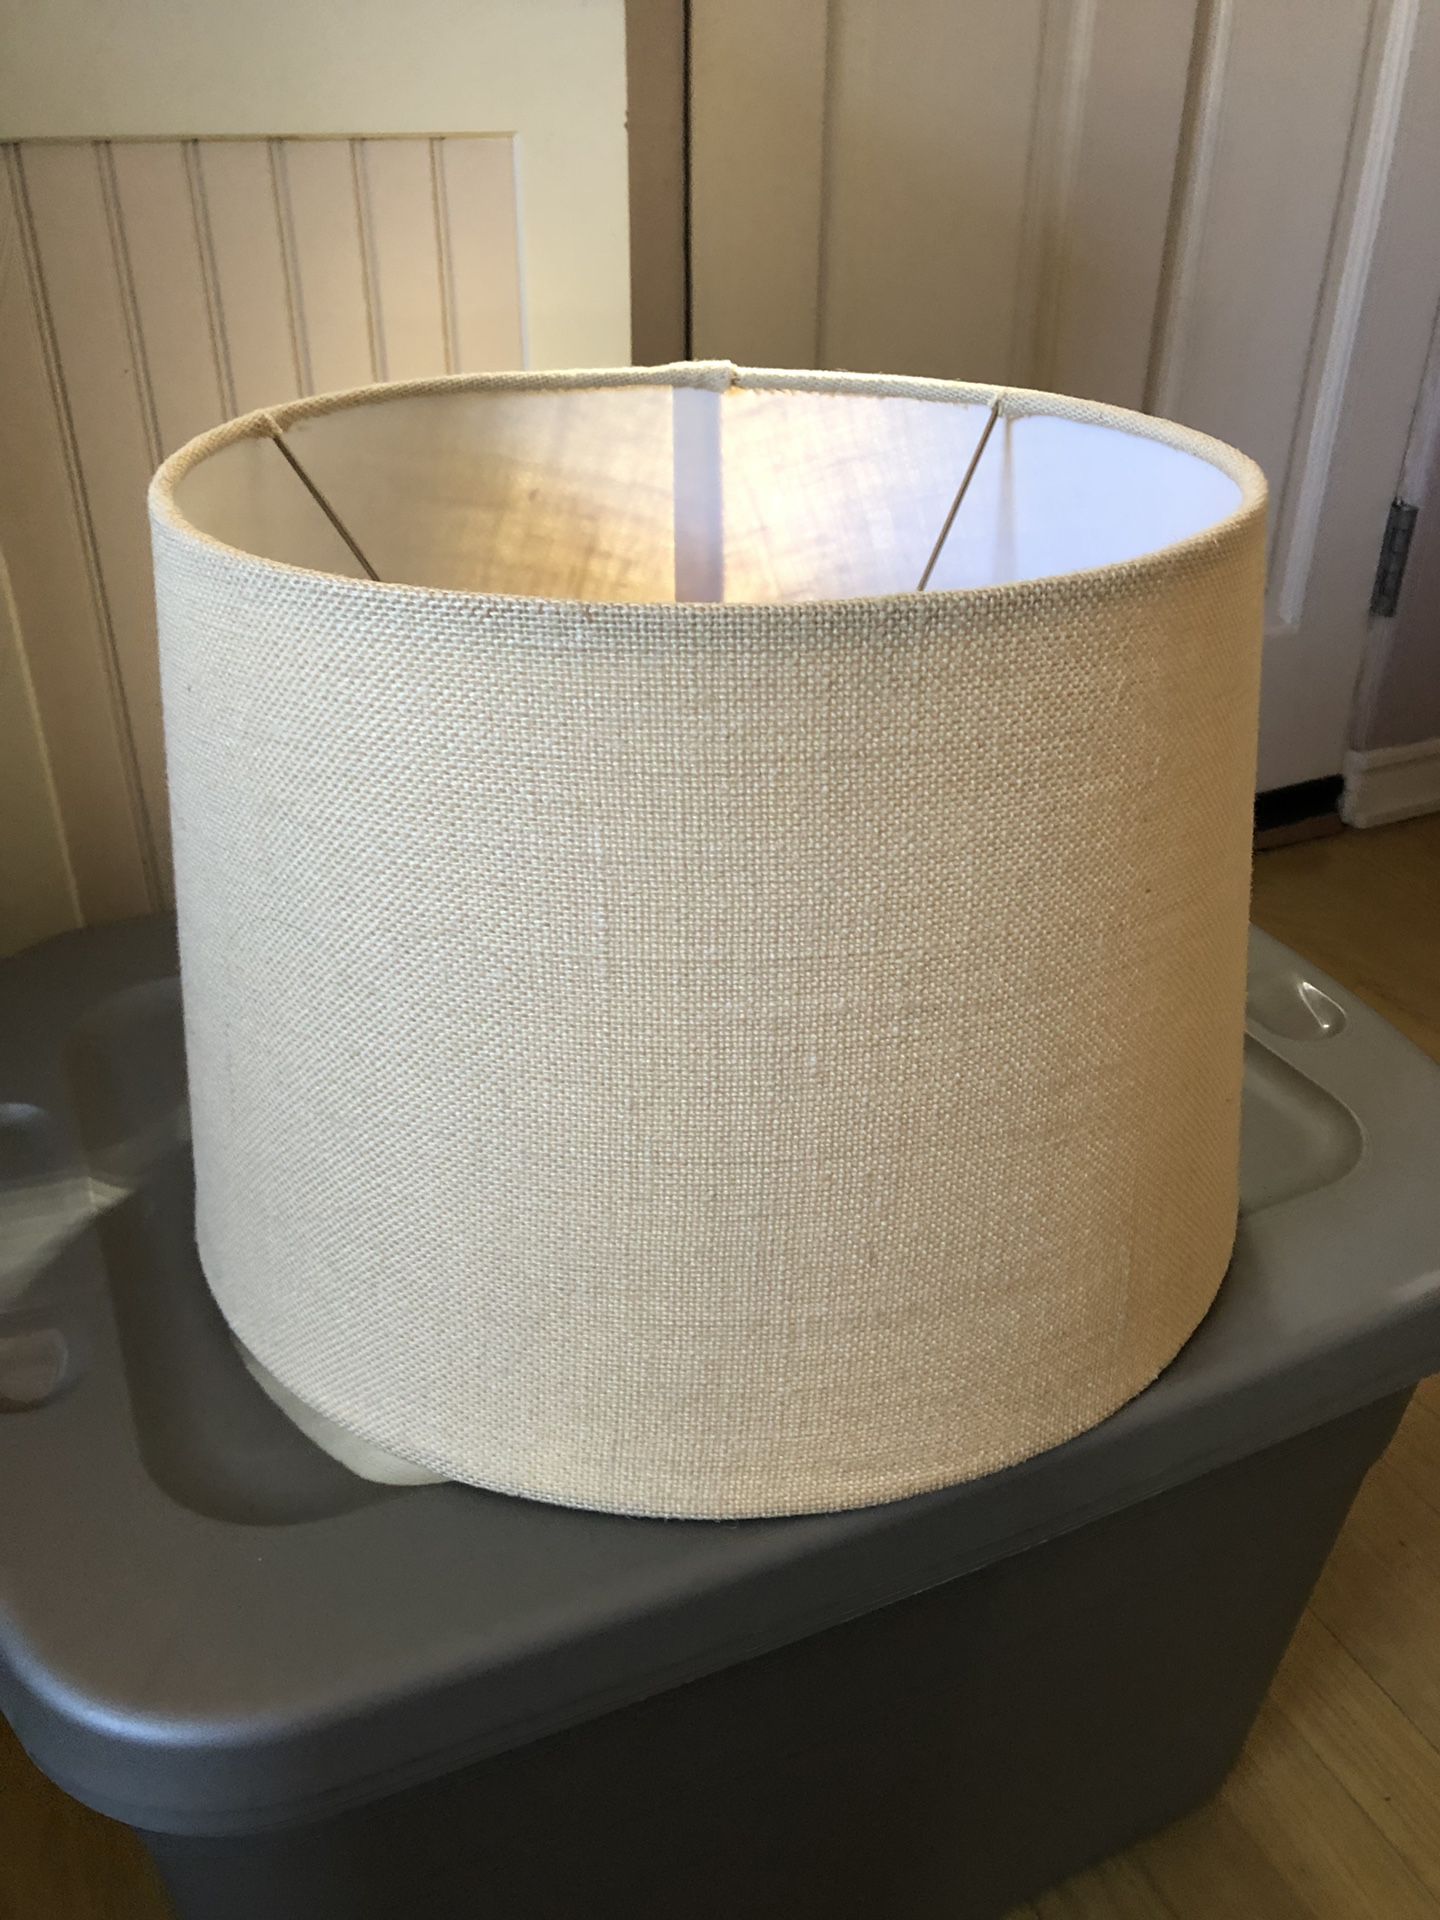 (2) Linen colored lamp shades